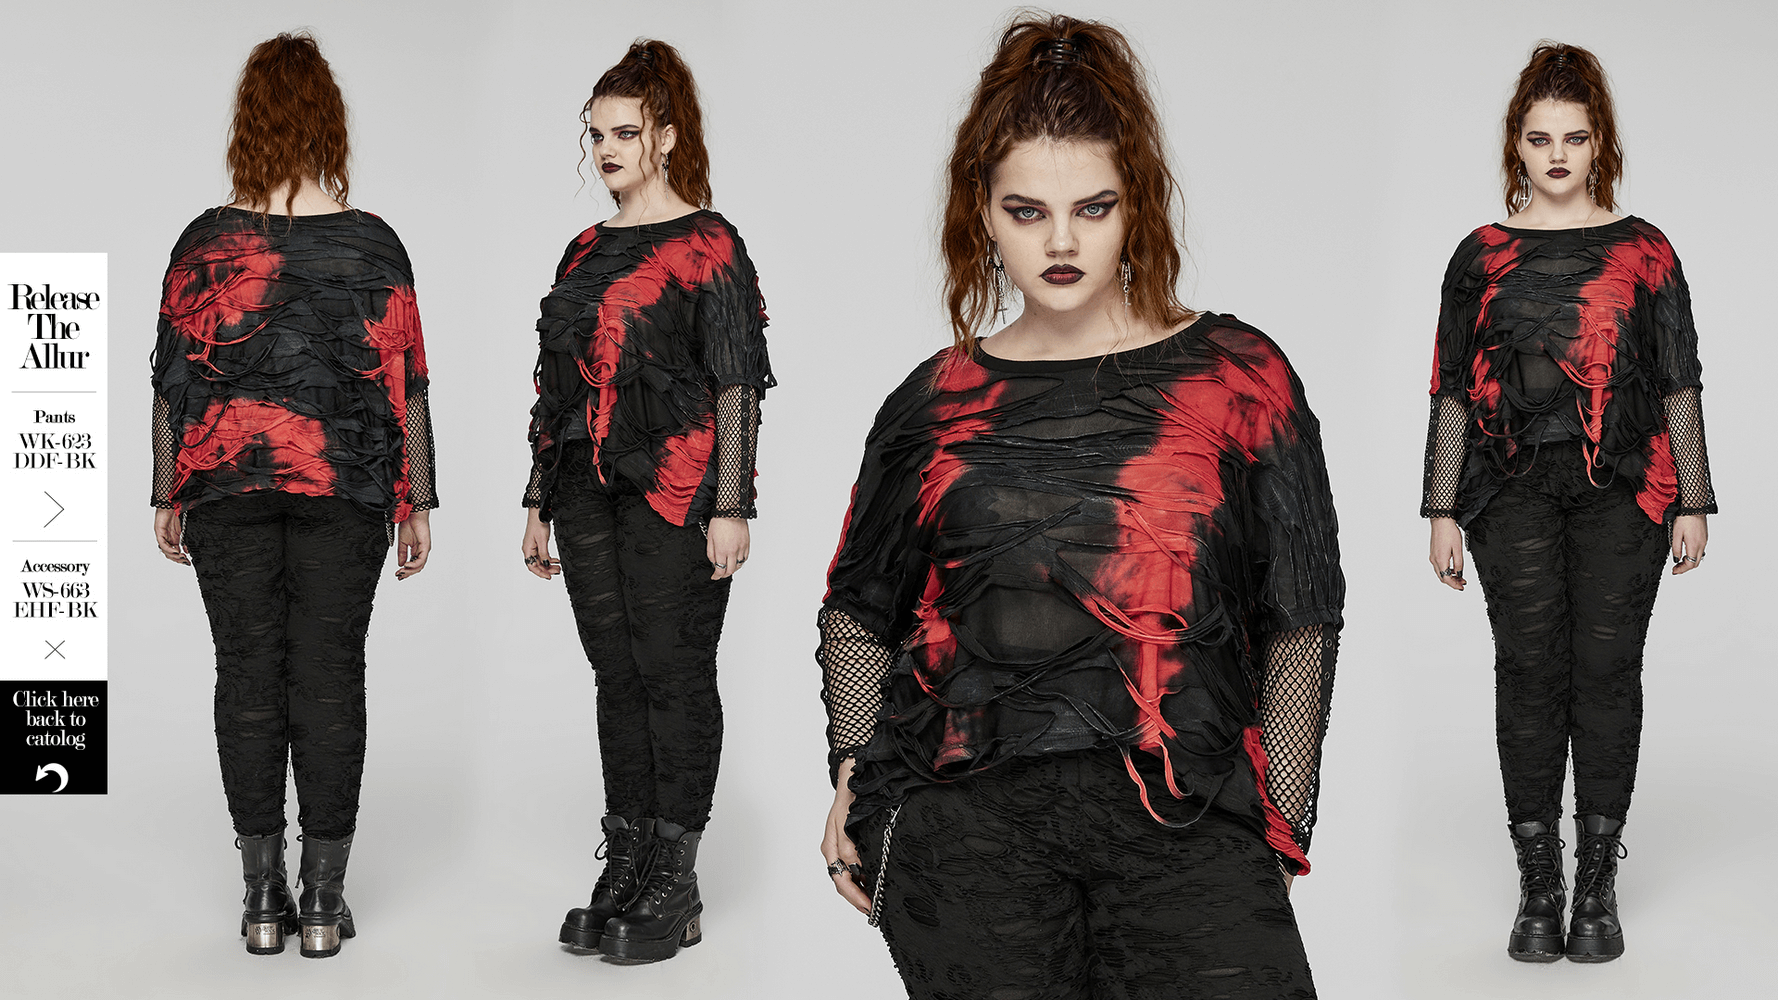 Edgy Punk Tie-Dye Loose Top with Mesh Sleeves for Women